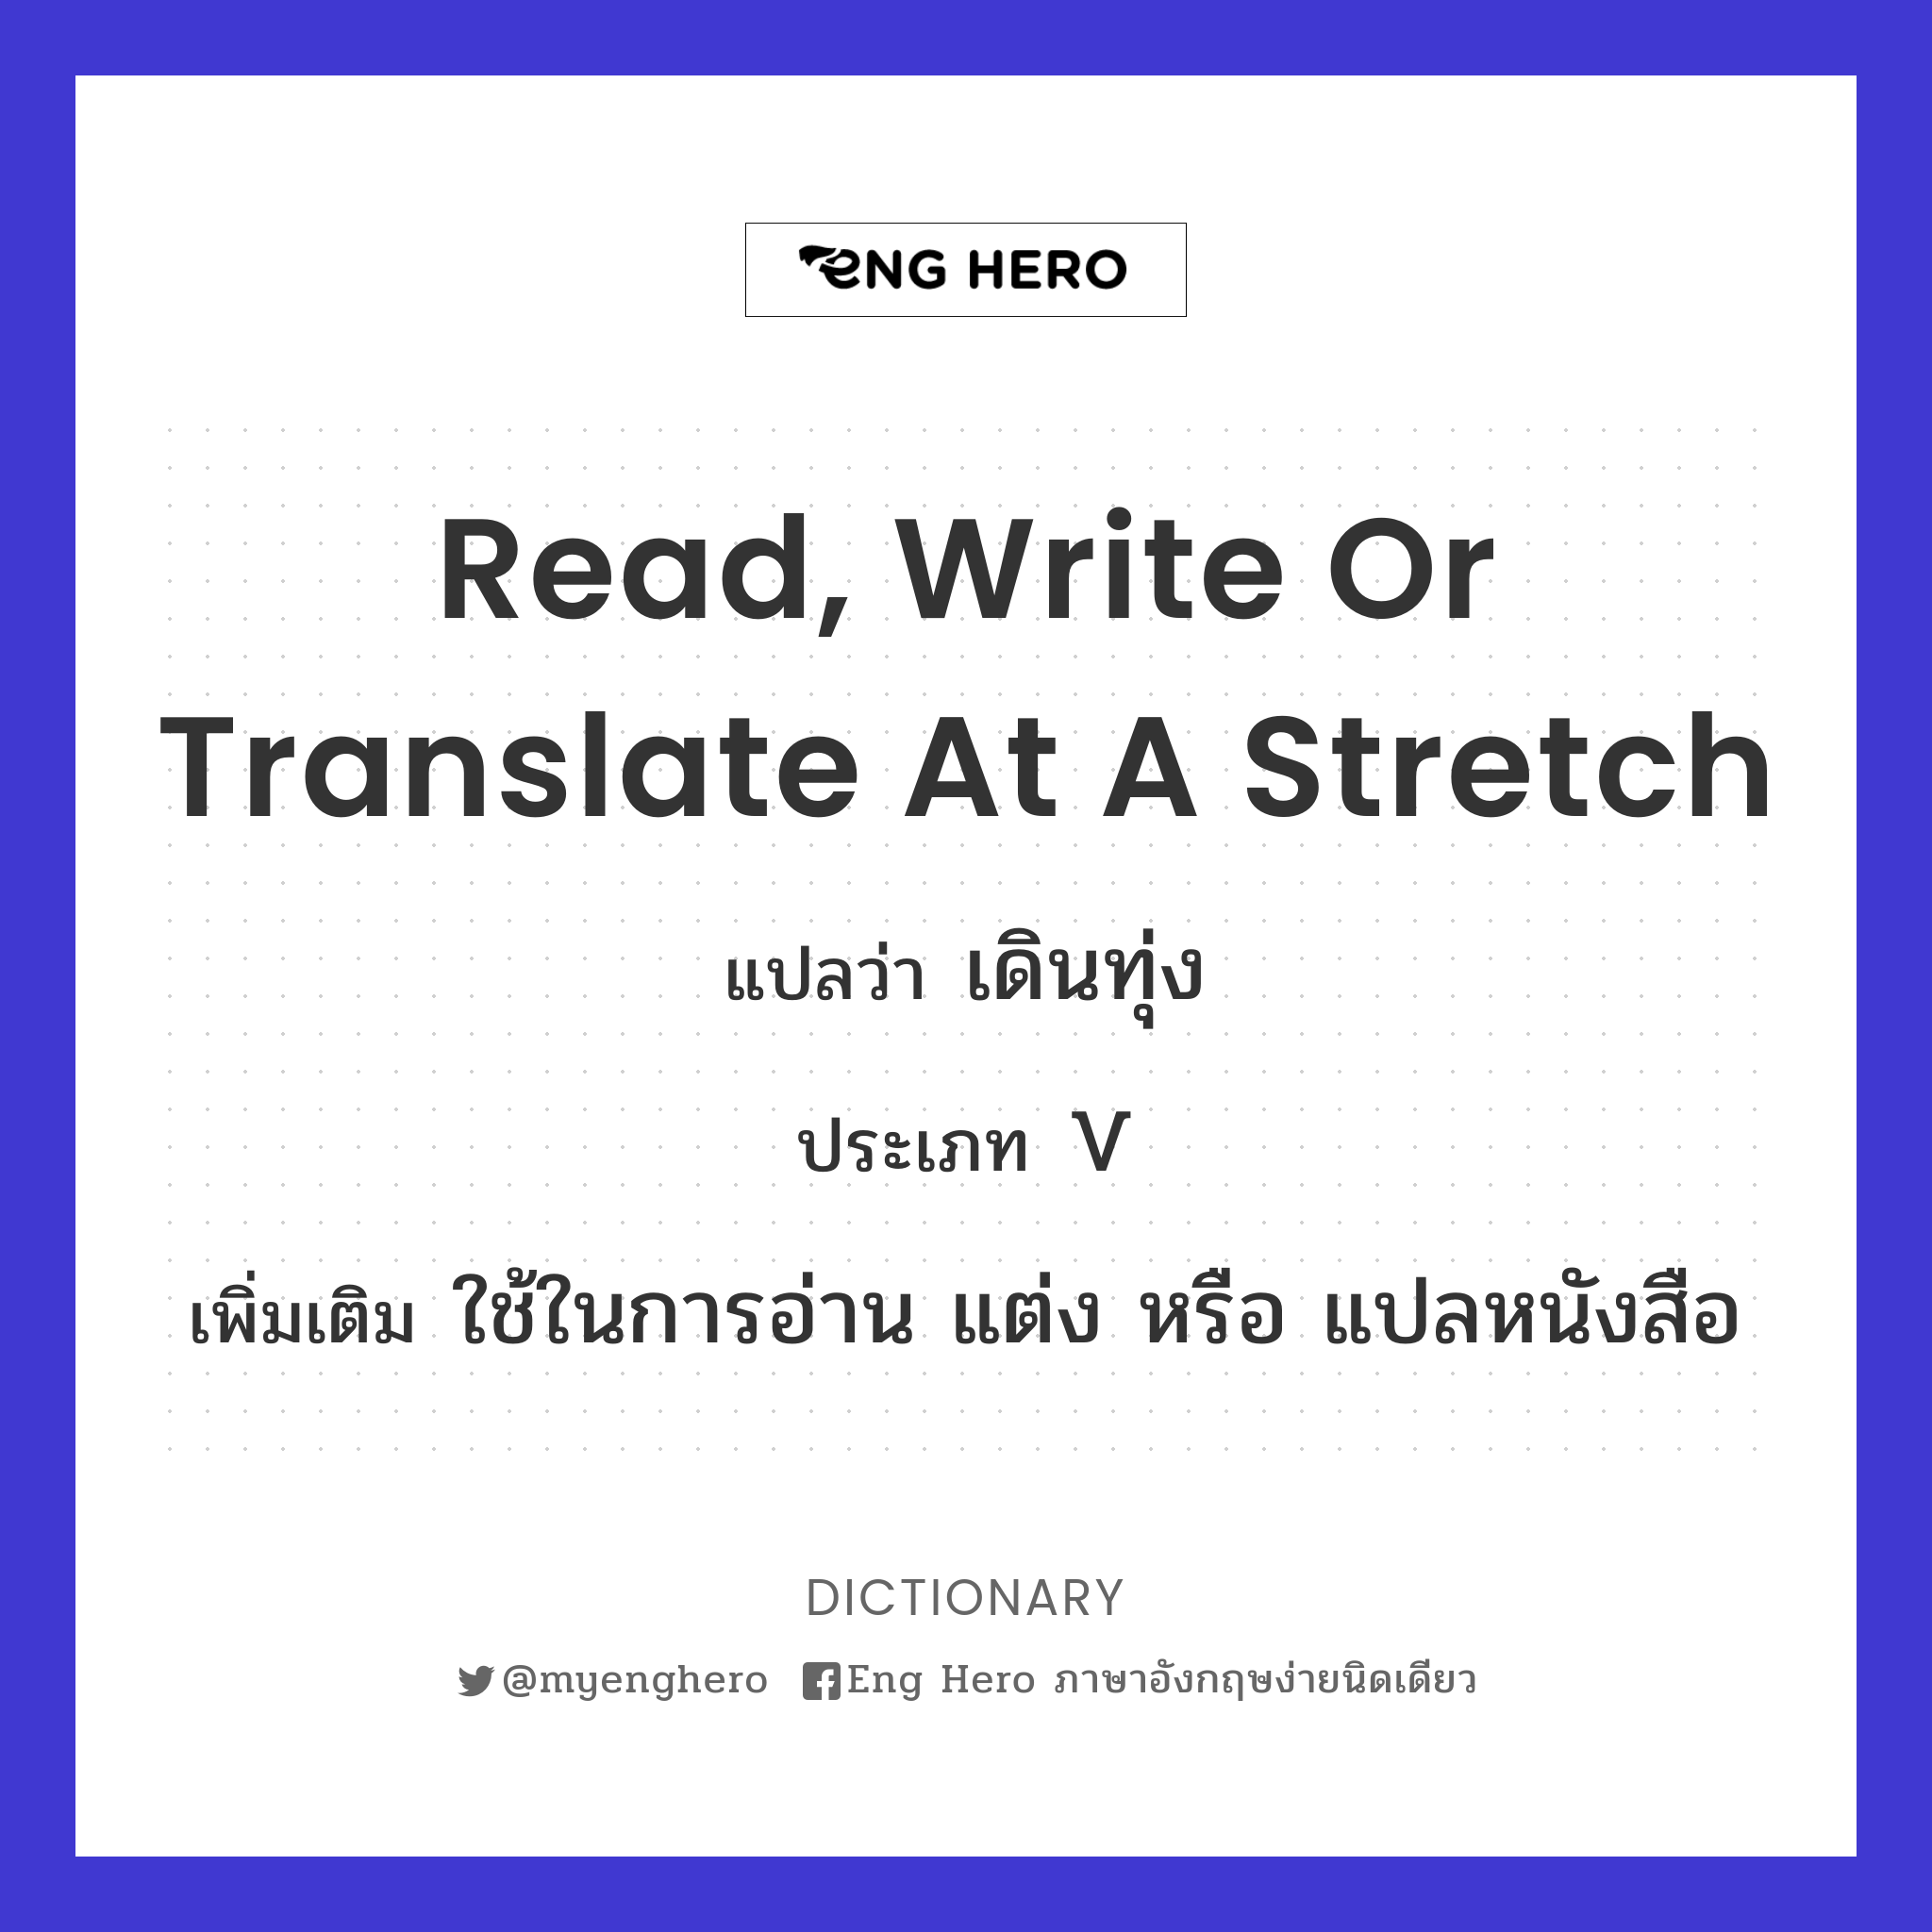 read, write or translate at a stretch